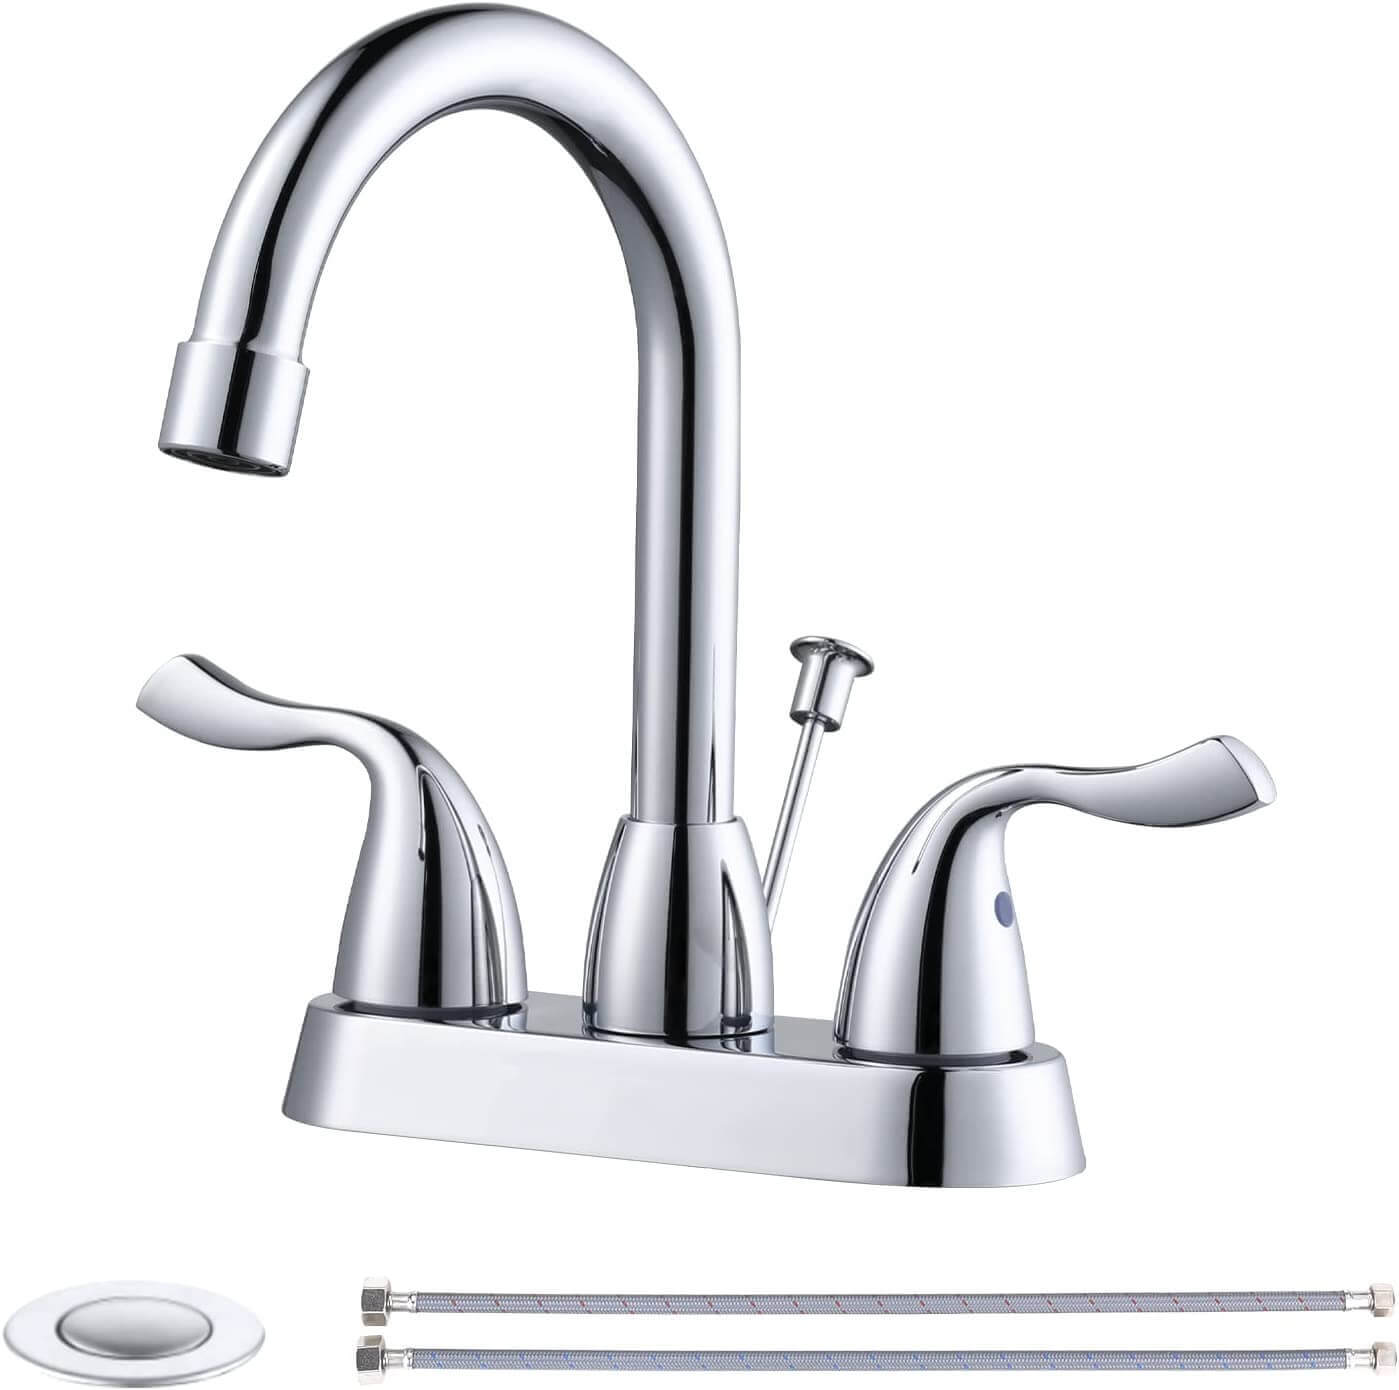 iVIGA Chrome 4 Inch Centerset Bathroom Sink Faucet with Drain Assembly and Supply Hoses